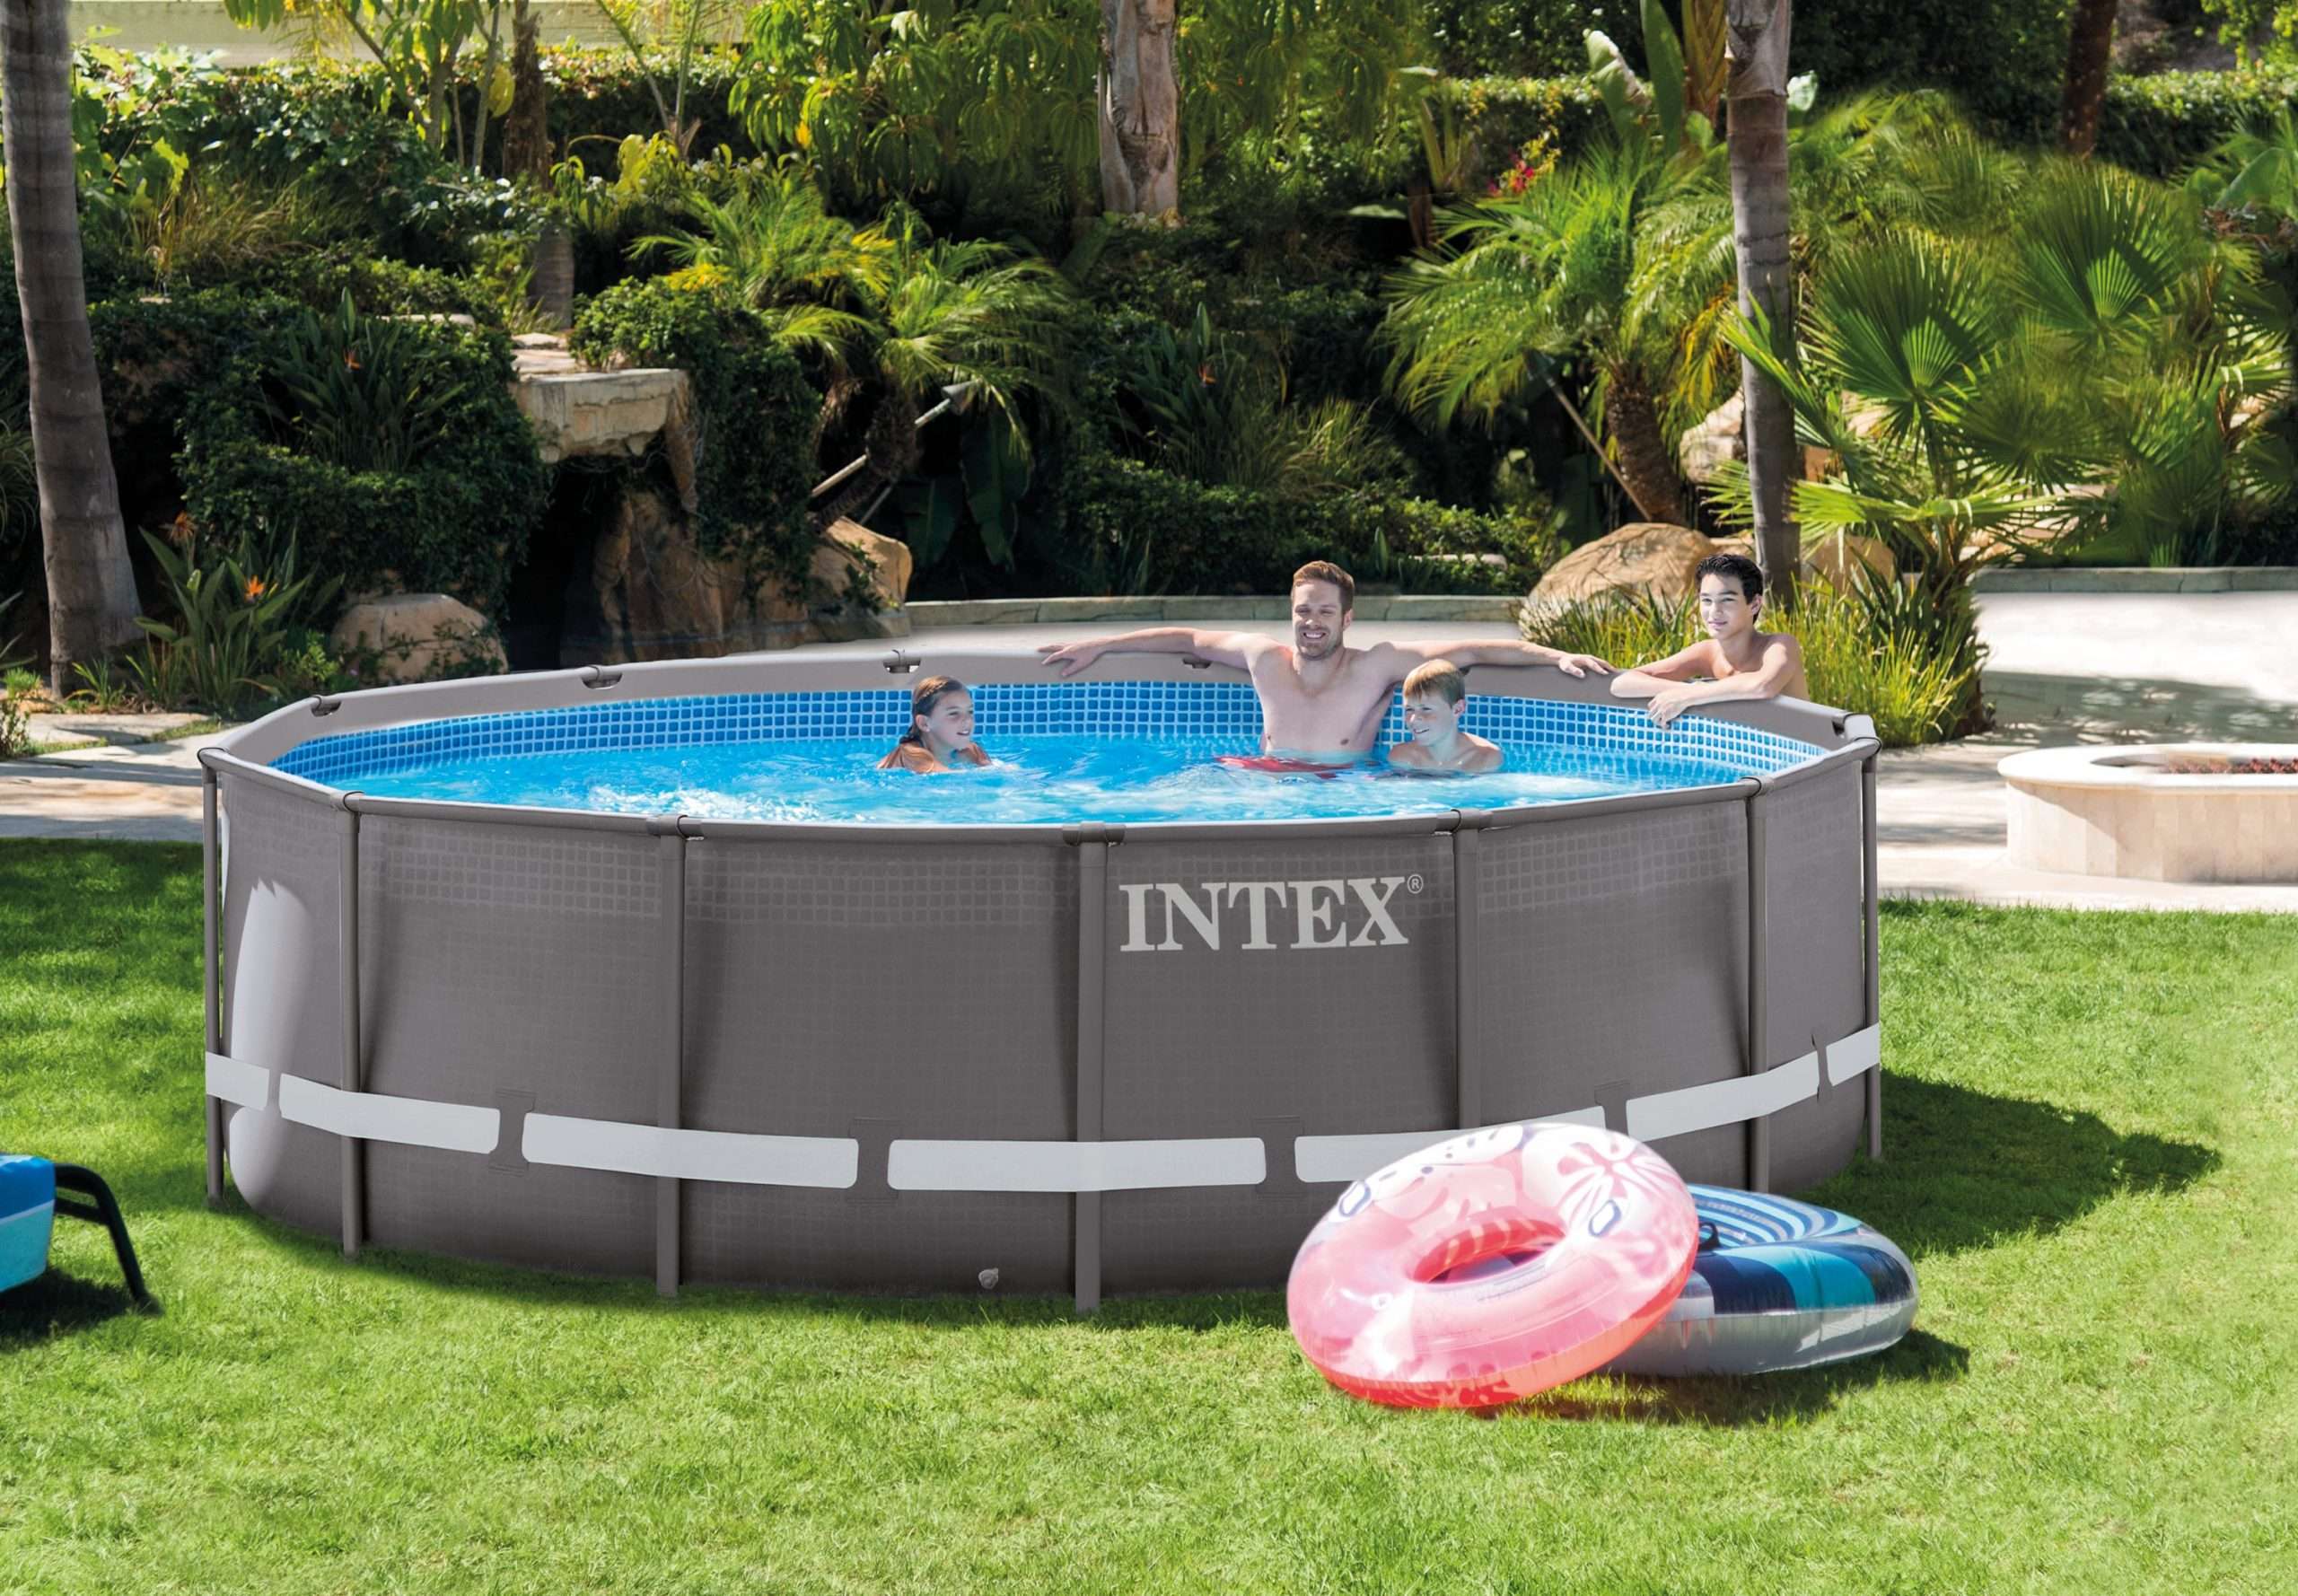 Problems of Unlevel Pool: How Unlevel Can An Intex Pool Be?